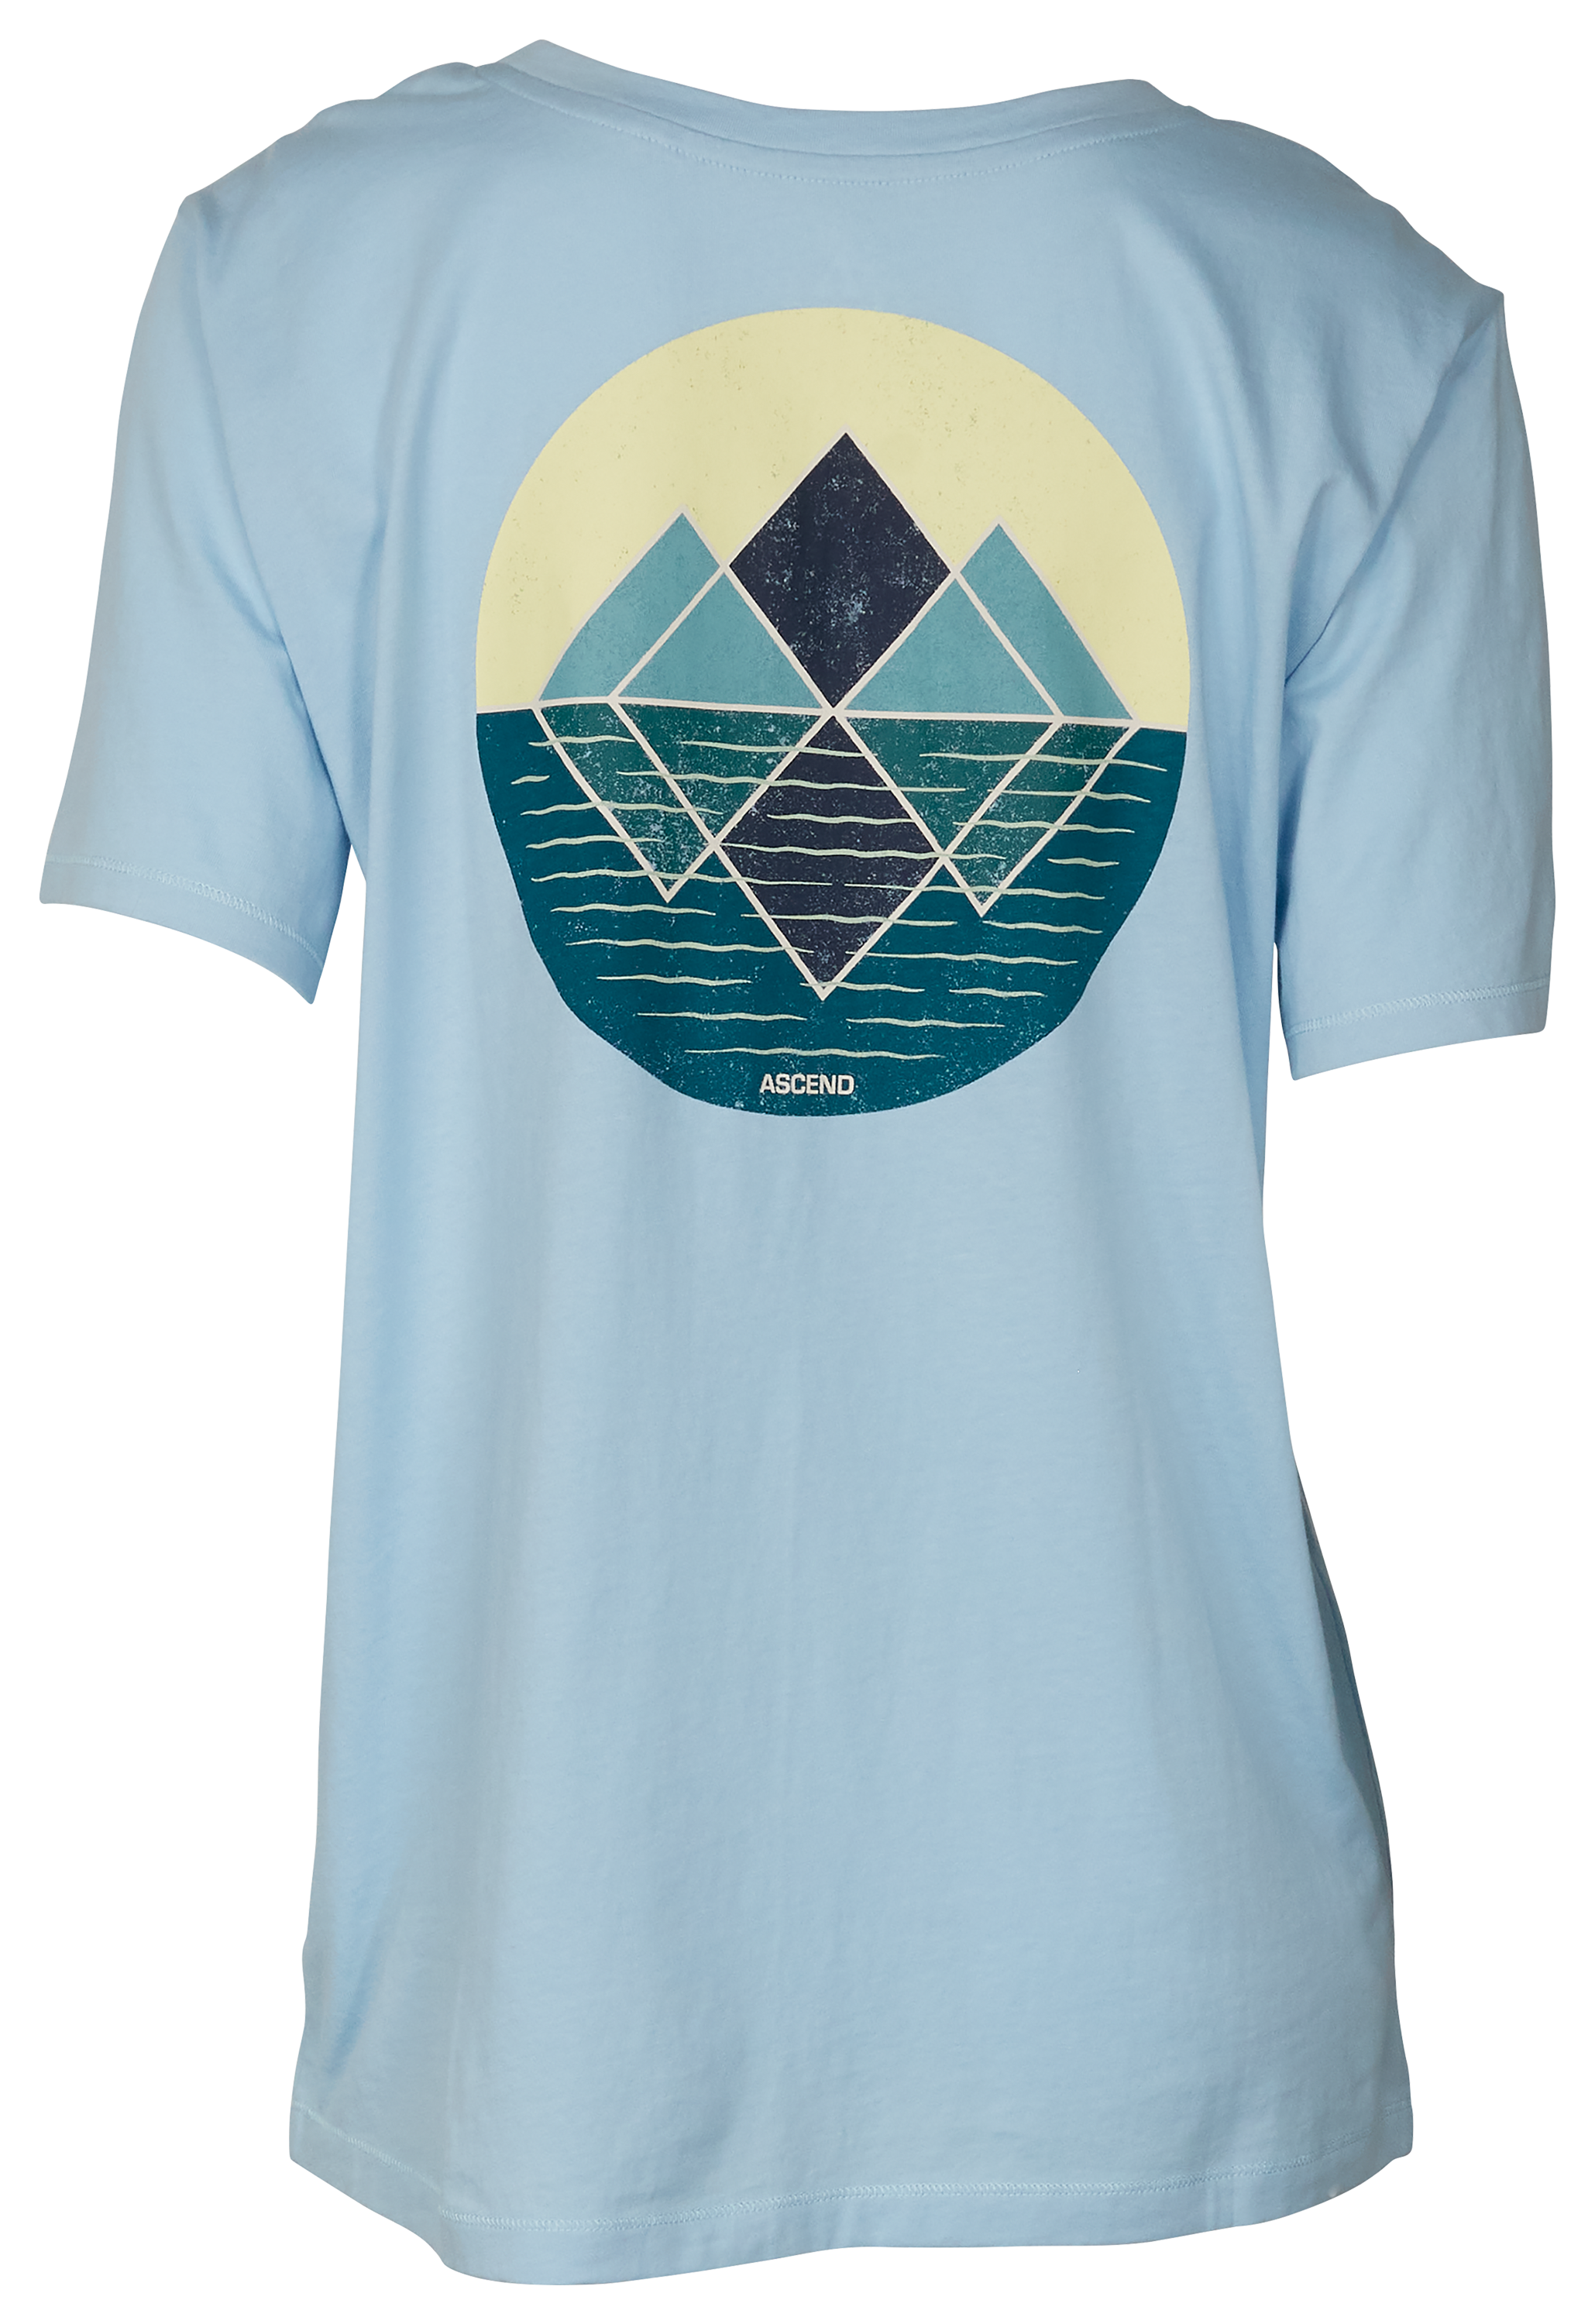 Mountain shirts designed with a passion for the outdoors and